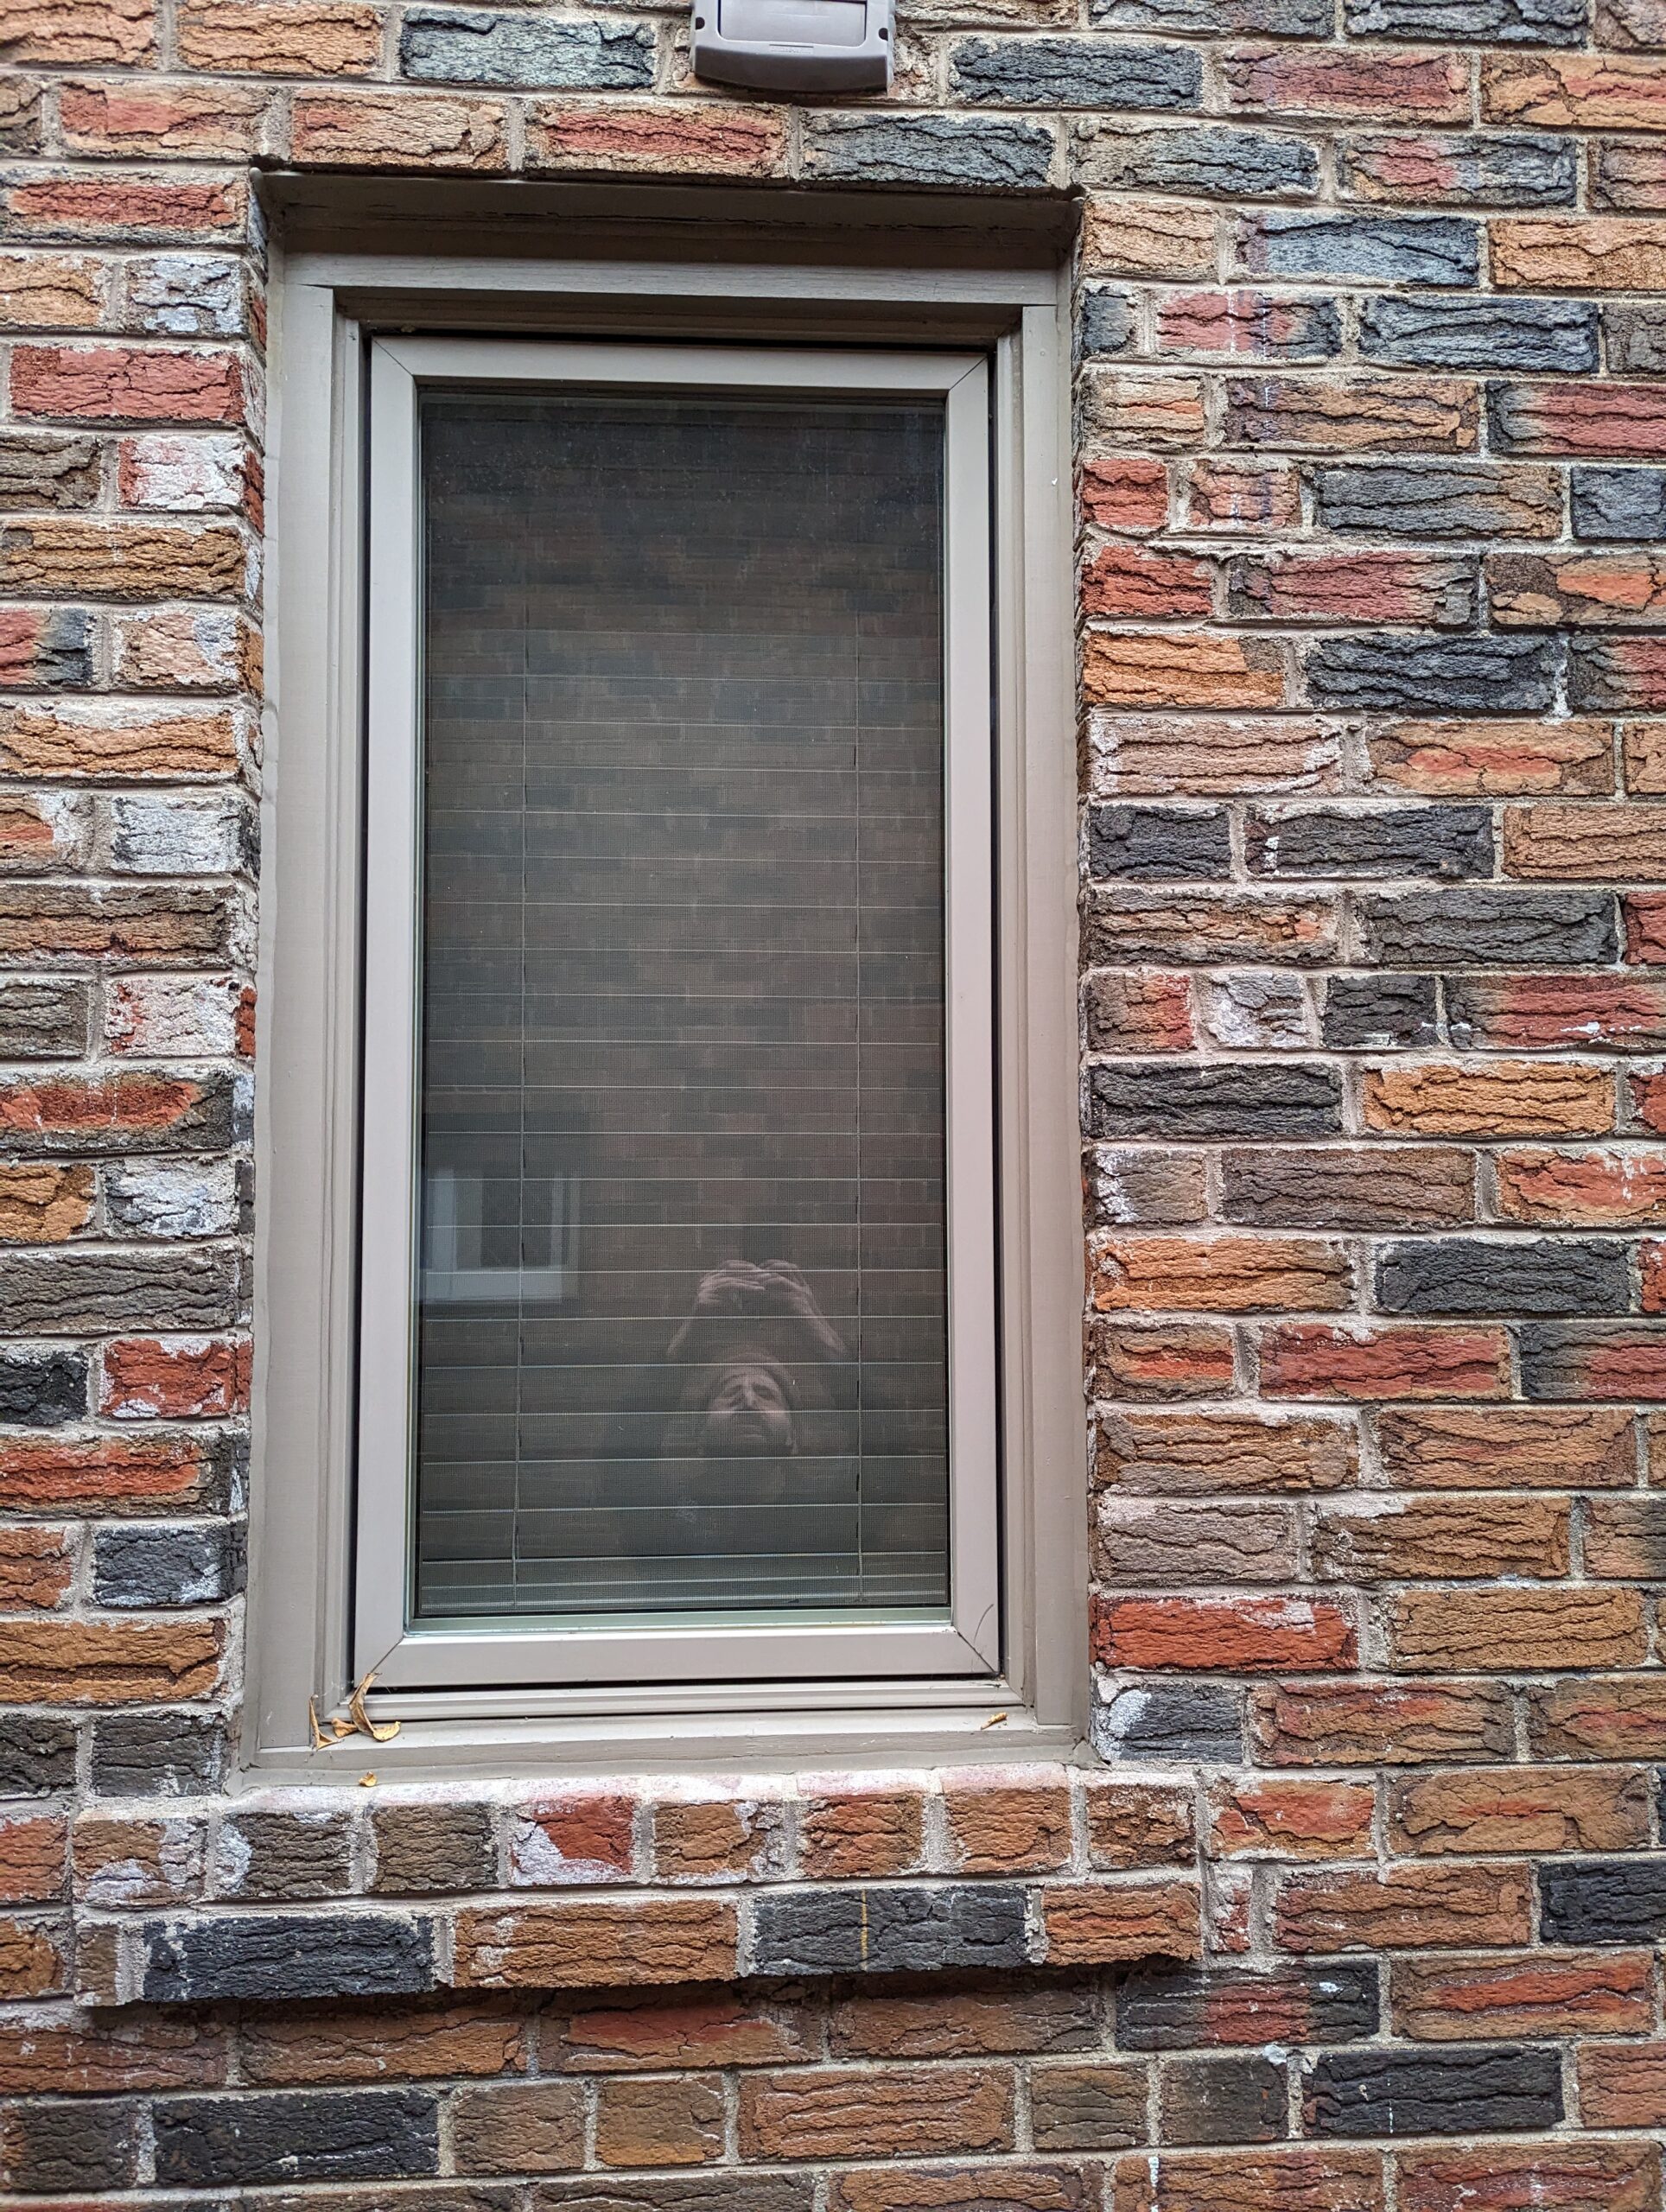 chromatist painters painted vinyl window frame exterior in a cream for toronto house